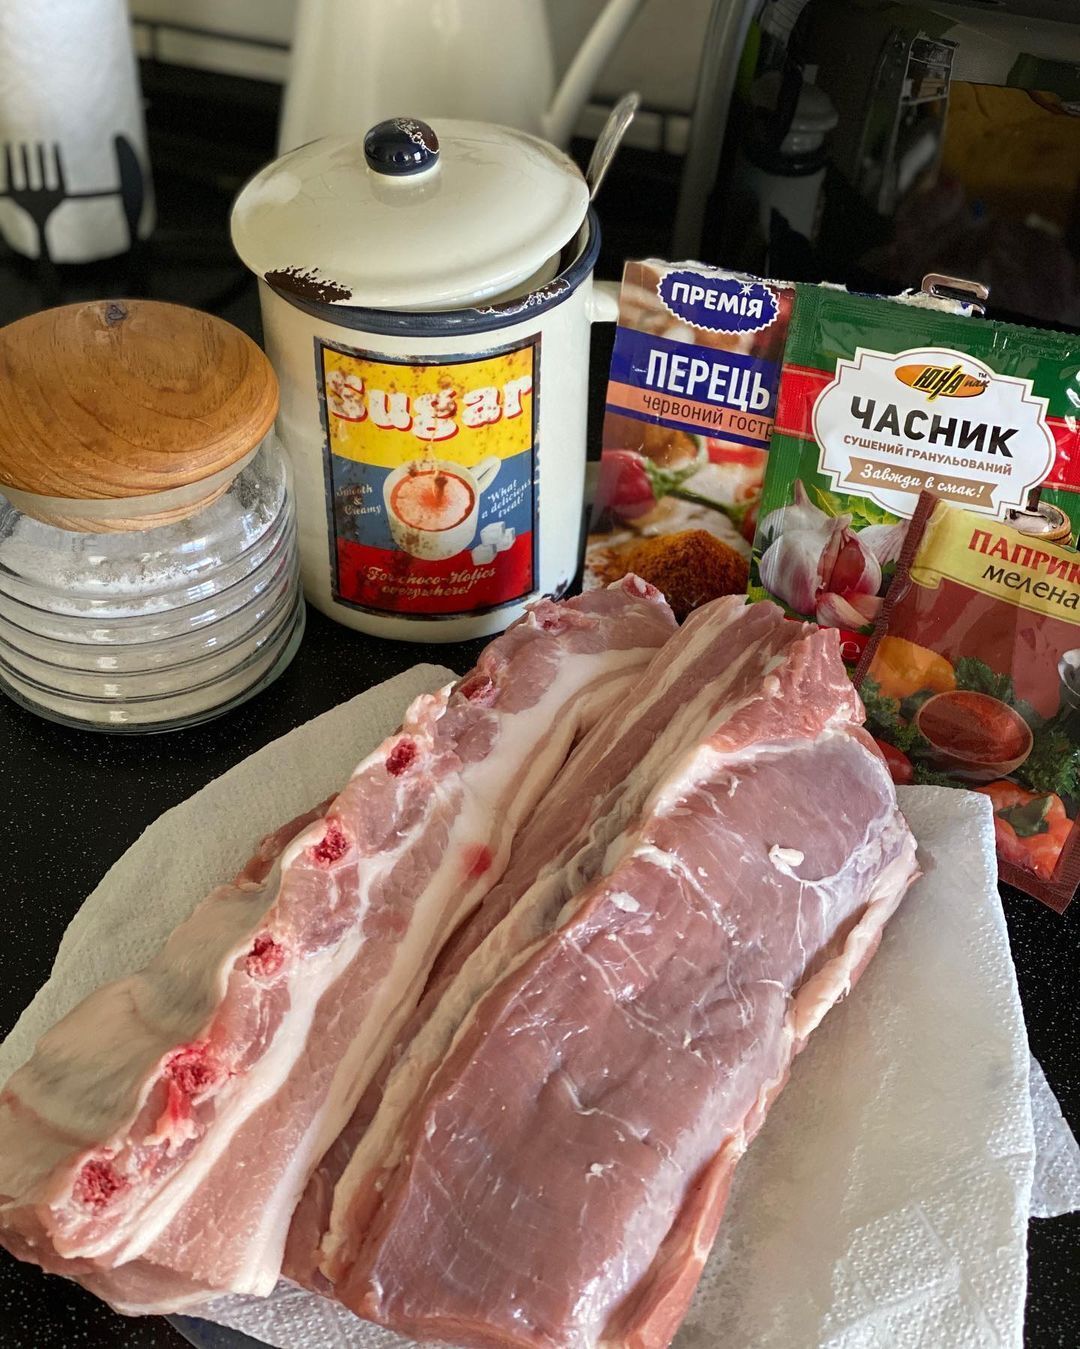 Ribs for cooking